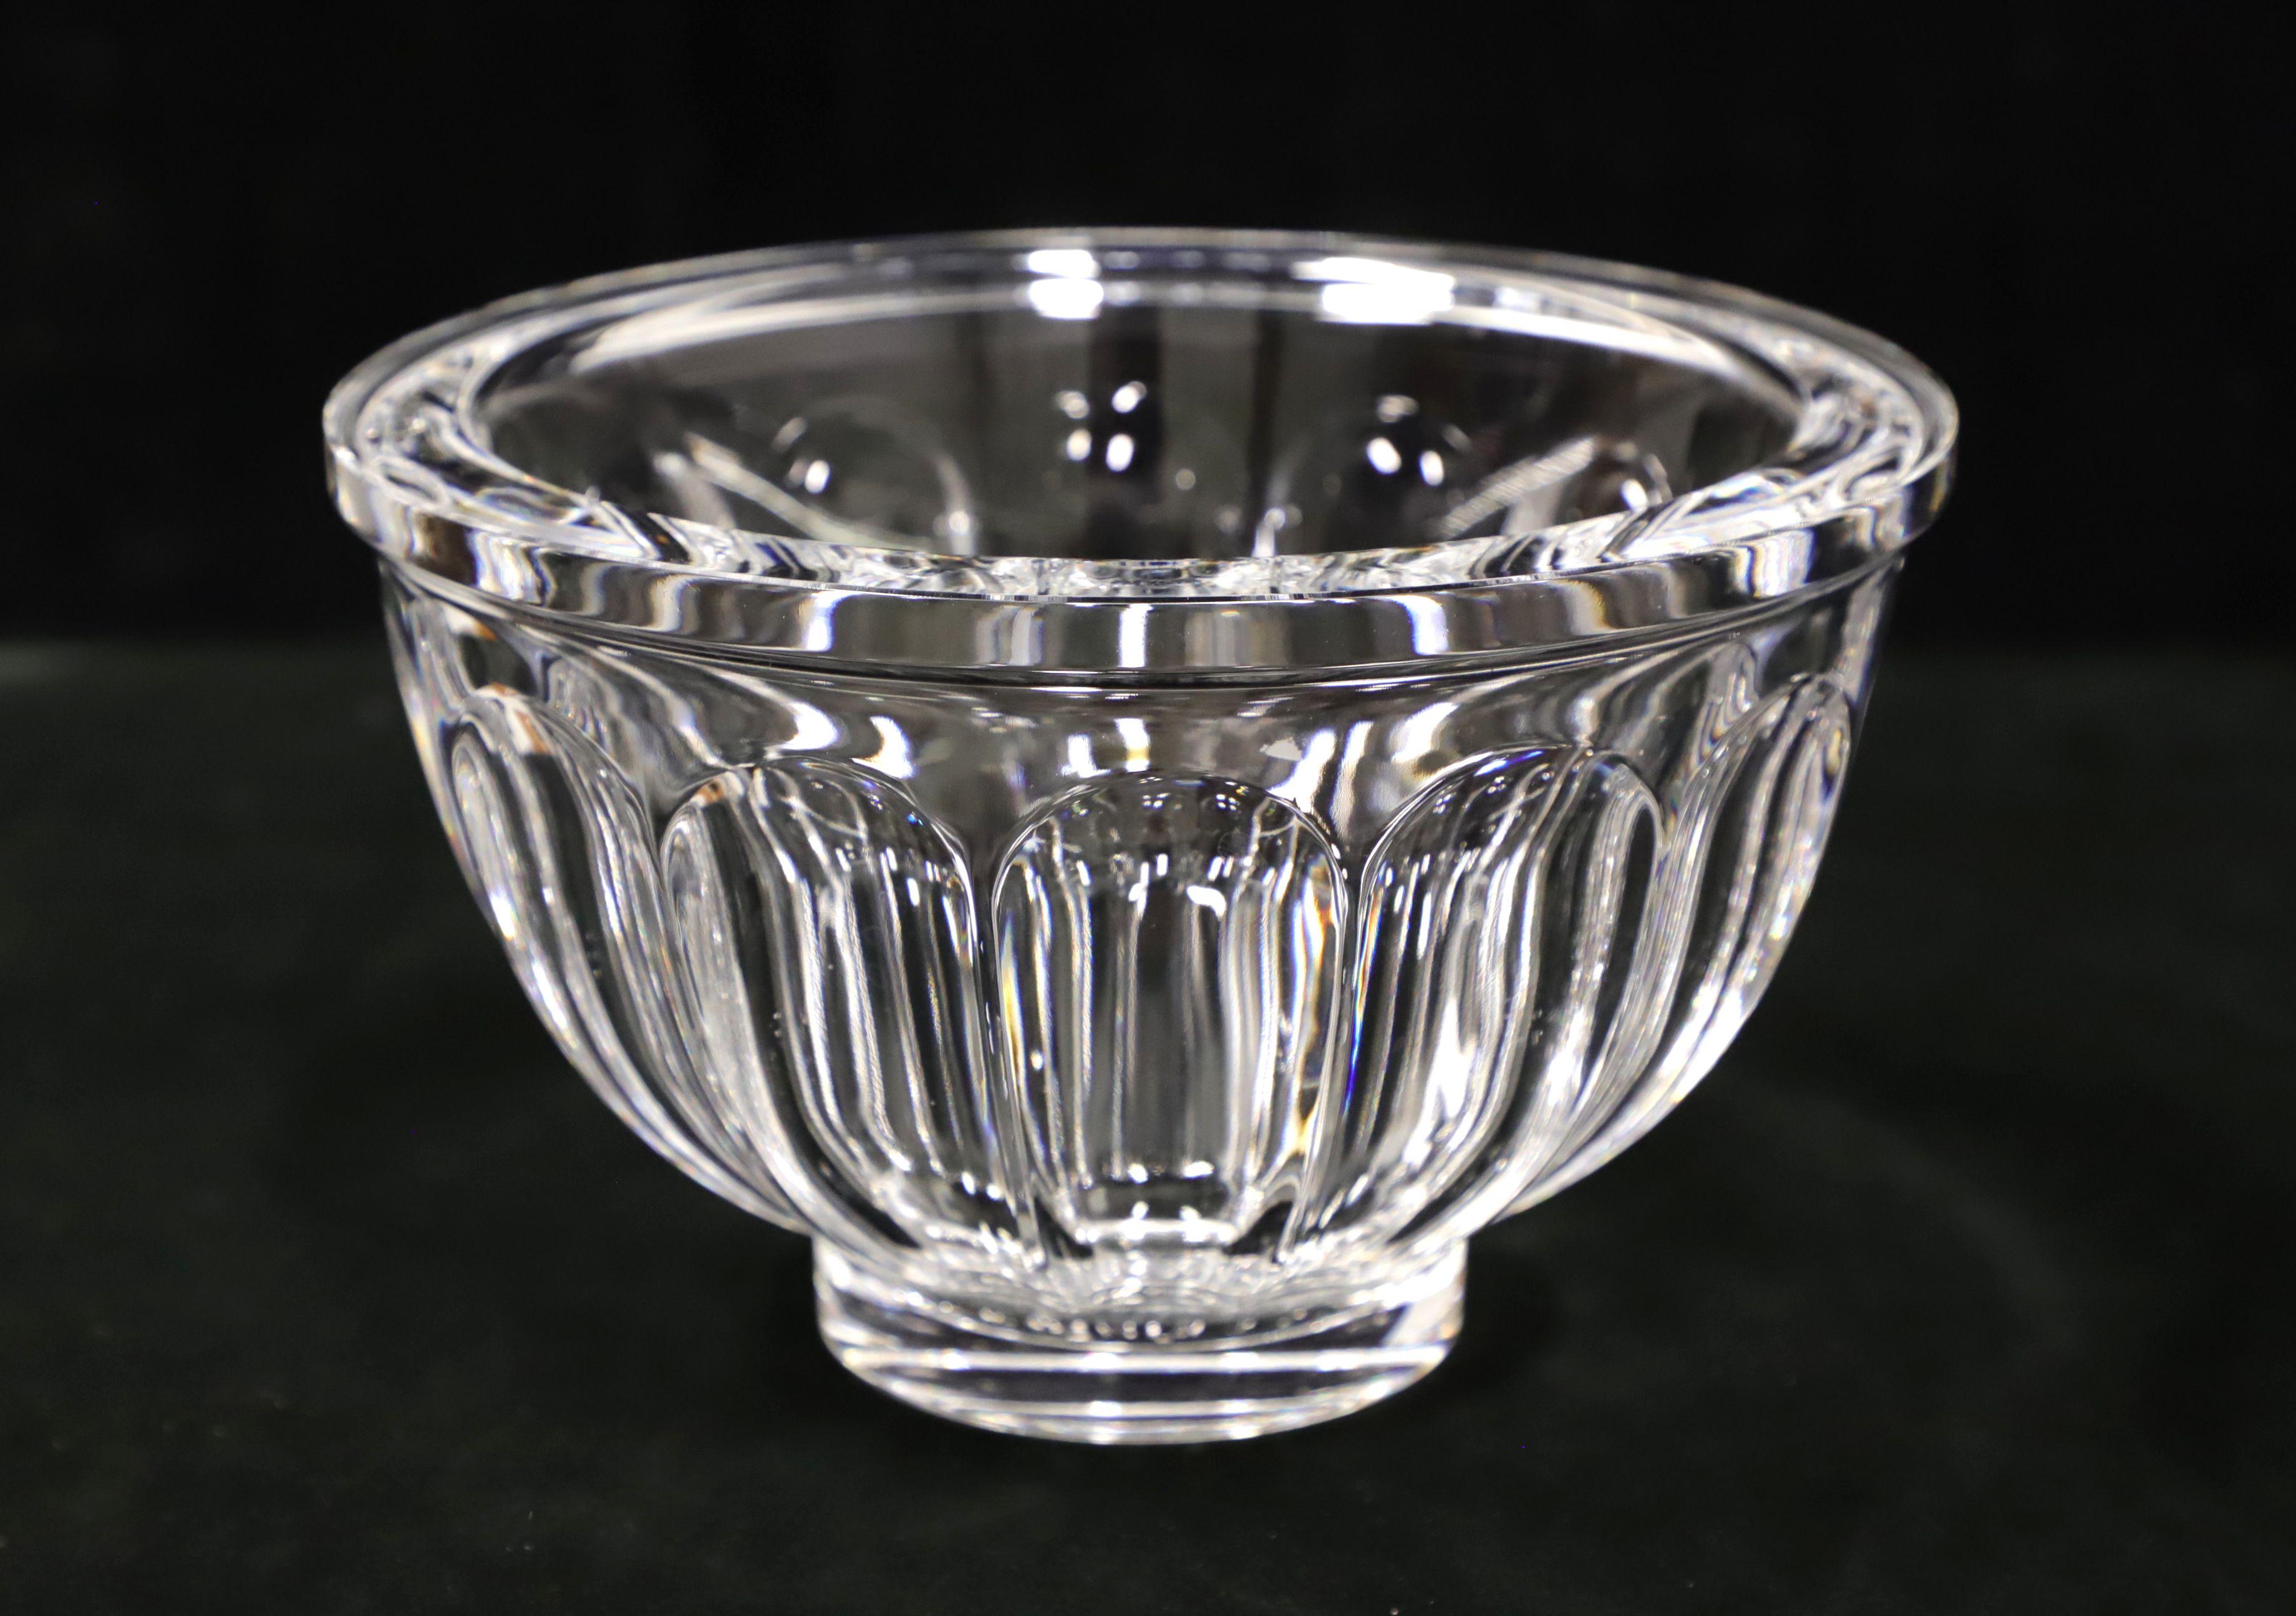 A Late 20th Century decorative crystal bowl. Clear thick crystal round bowl with a narrow solid rim with cut ovals beneath tapering narrower to a solid bottom. Origin unknown, most likely the USA.

Measures: 8W 8D 5H, weighs approximately: 6